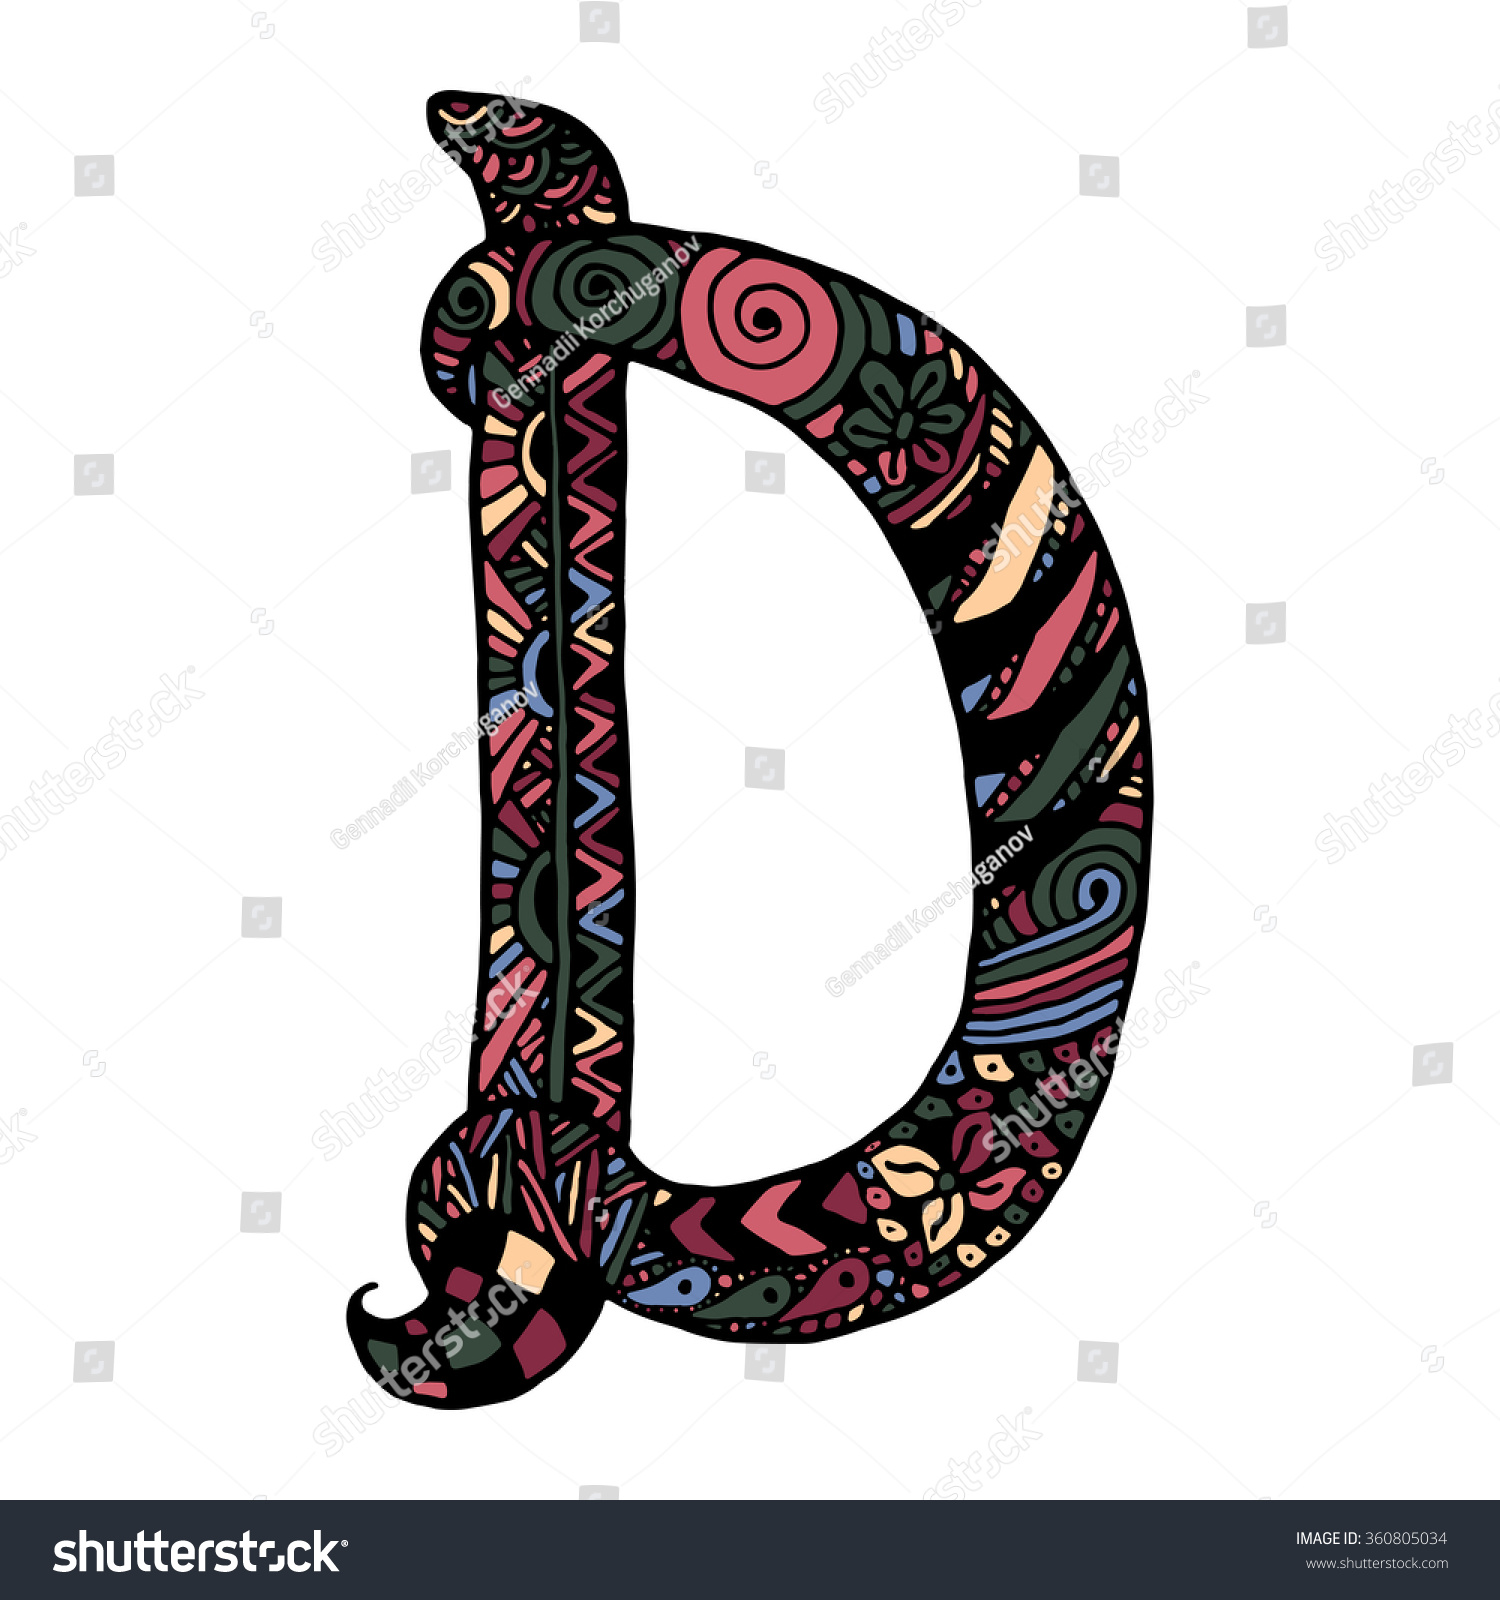 Hand drawing letter d Images, Stock Photos & Vectors | Shutterstock